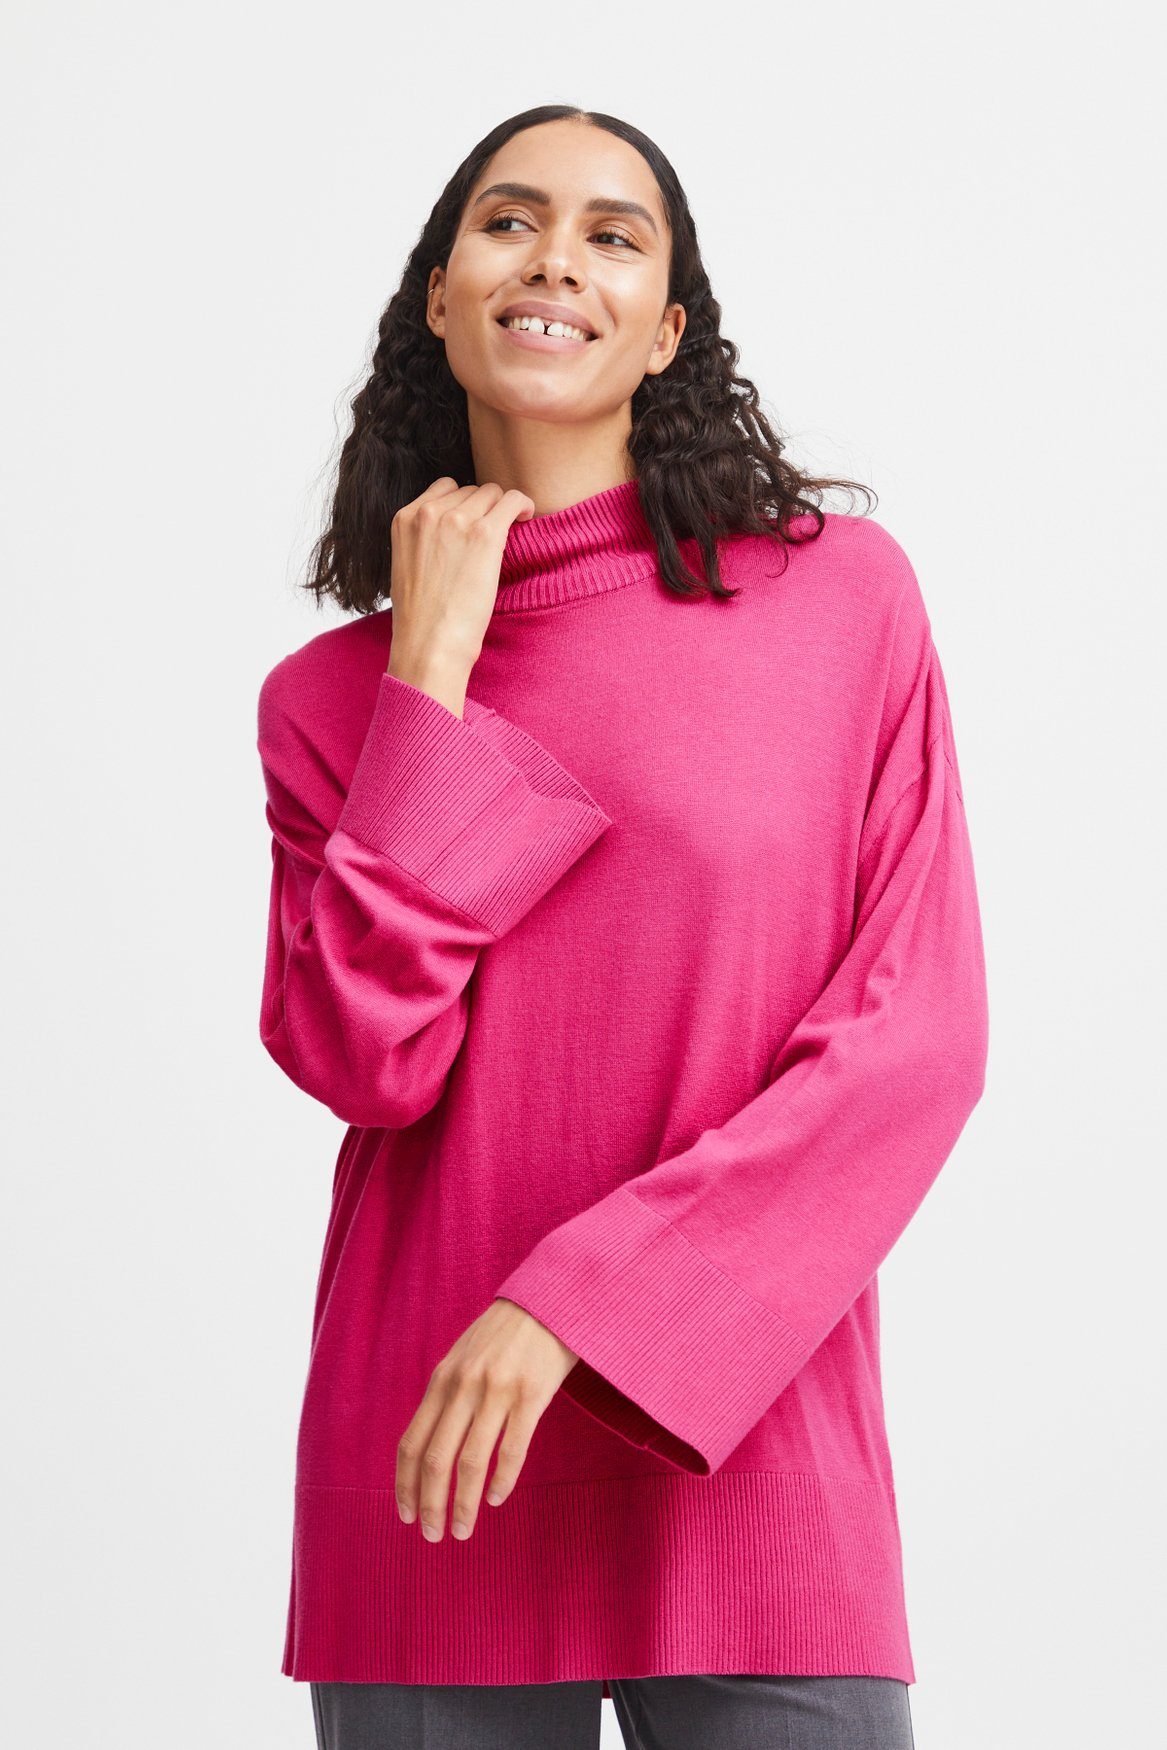 Shirt 6263 Feinstrick Pullover b.young Strickpullover BYMMPIMBA1 in Pink Langarm